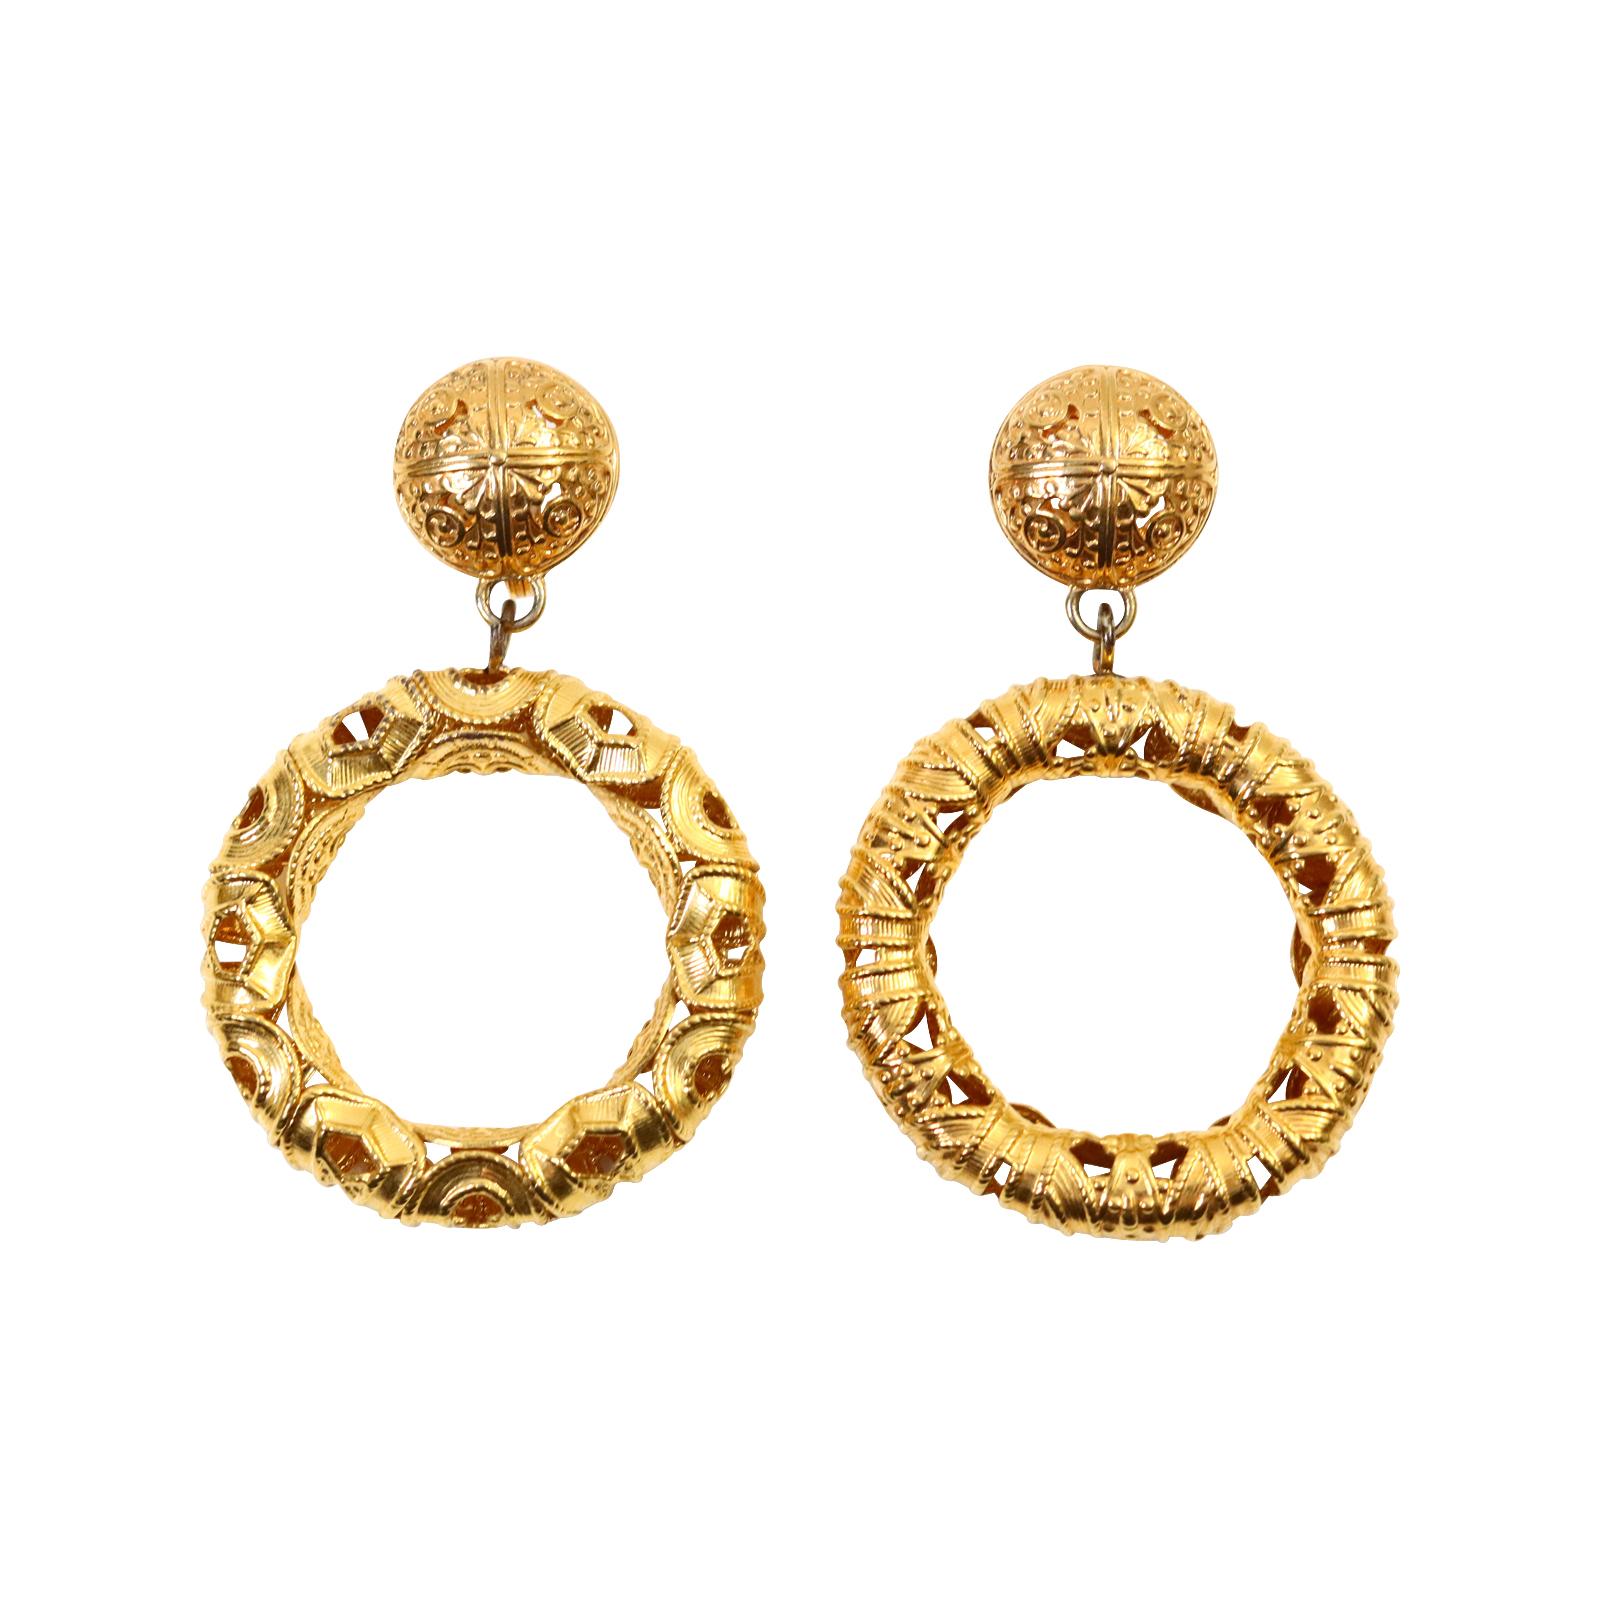 Vintage Monet Gold Tone Dangling  Etruscan Hoop Earrings Circa 1980s.  These are such well made classic earrings.   The clip is also well constructed.  People don't know or forget that Monet originally made the jewelry for YSL so look at the